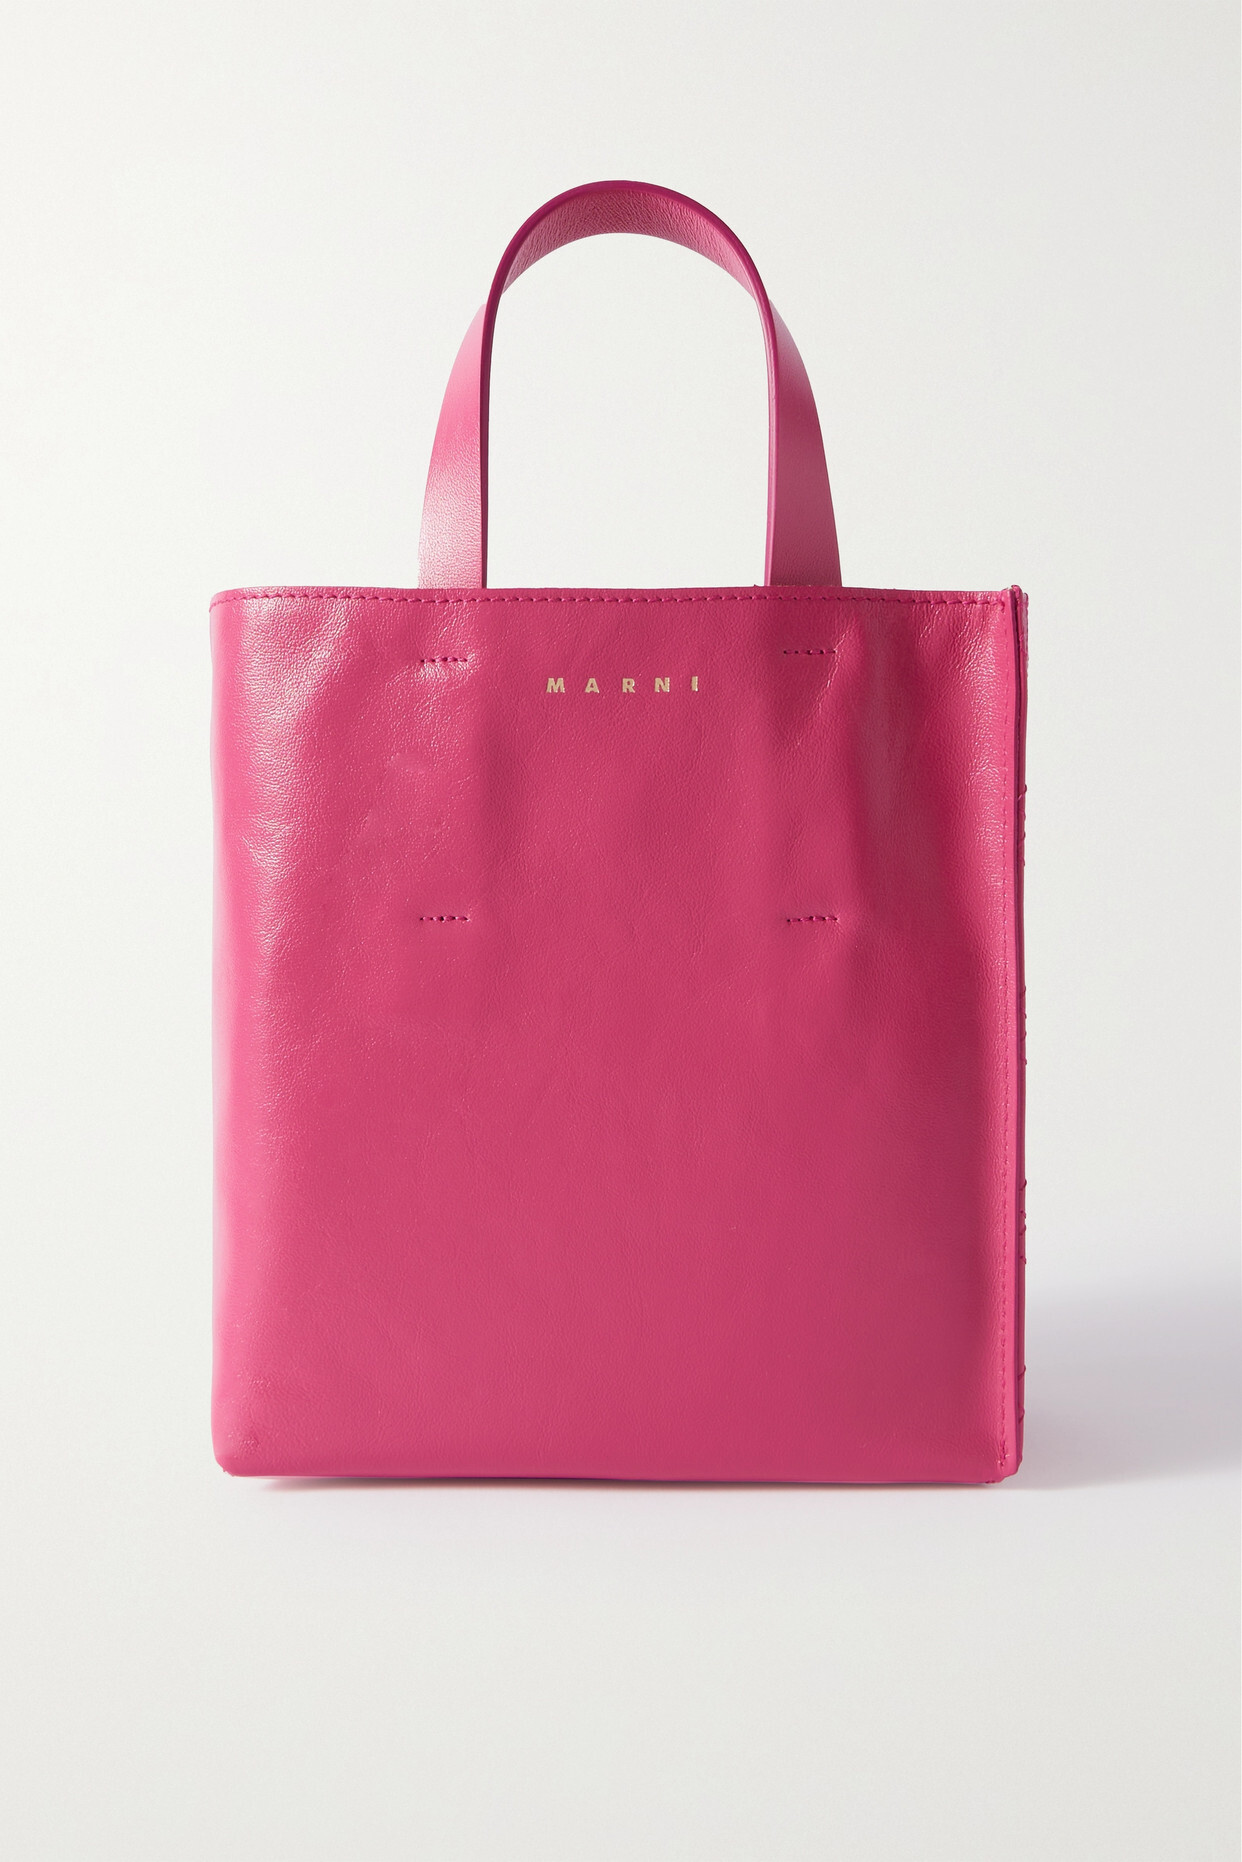 Marni - Museo Small Leather Shoulder Bag - Pink